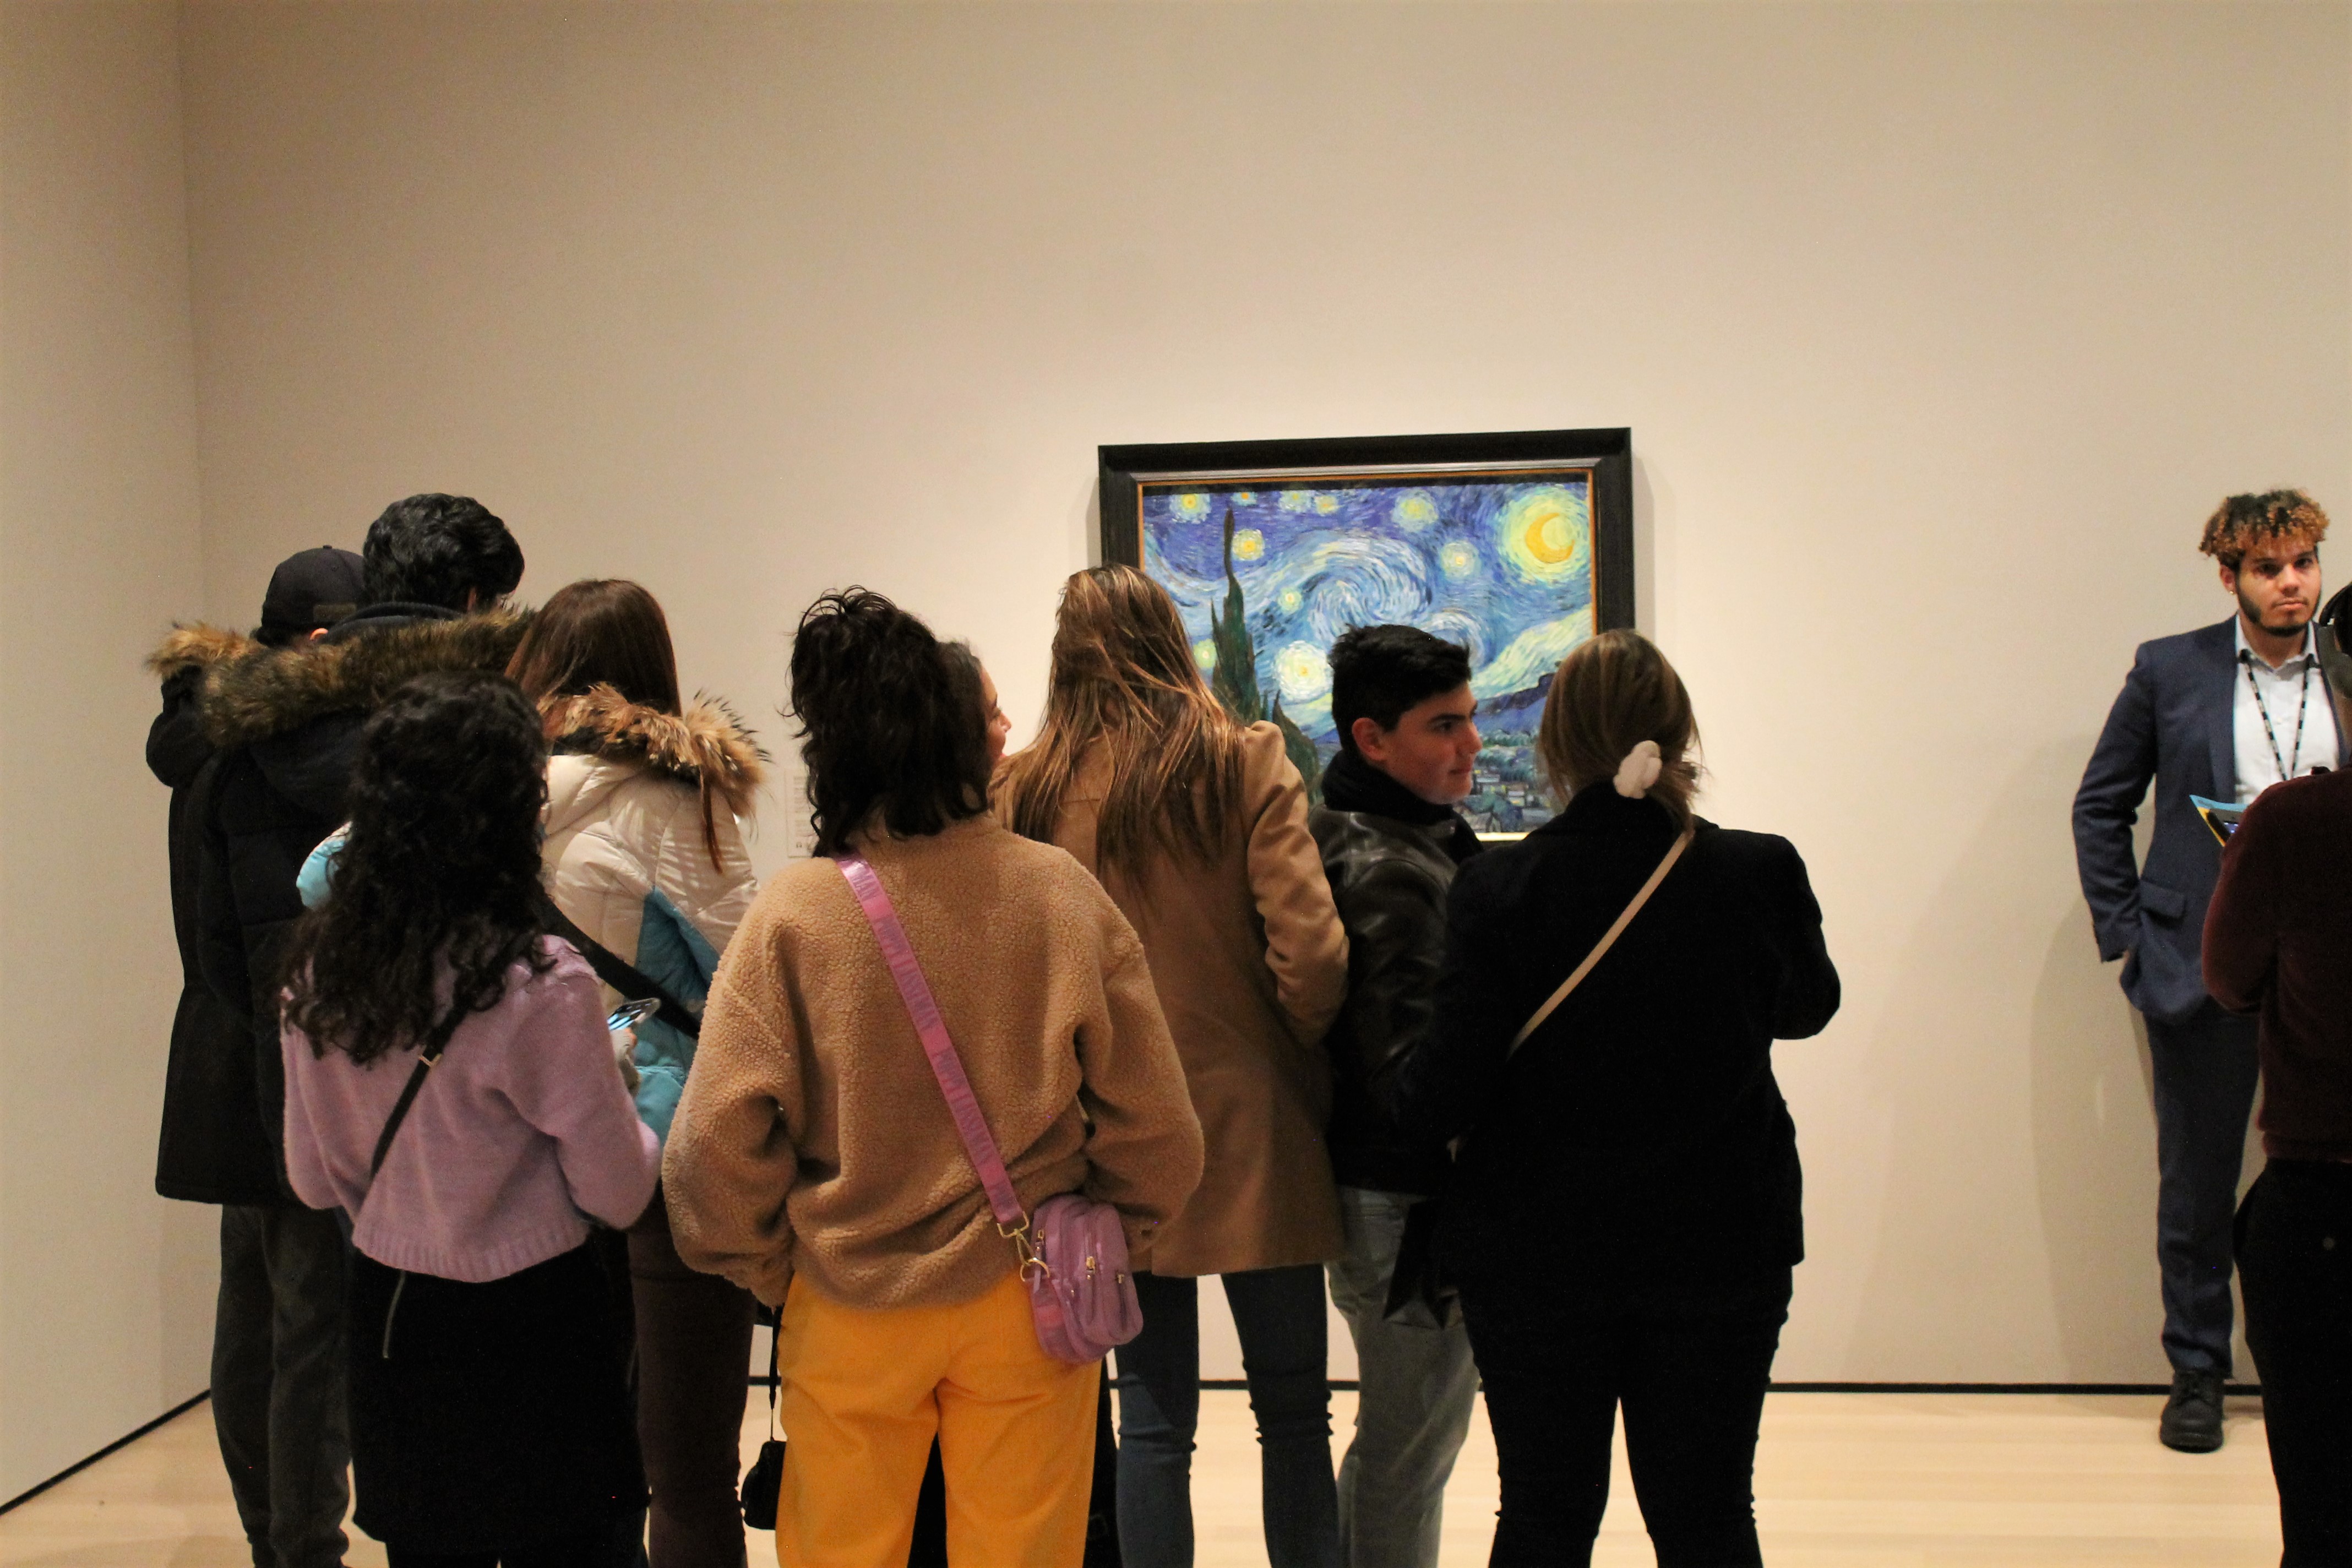 File:Crowd Gathers at Starry Night Painting in York City's Museum of Art (MOMA).jpg Wikimedia Commons